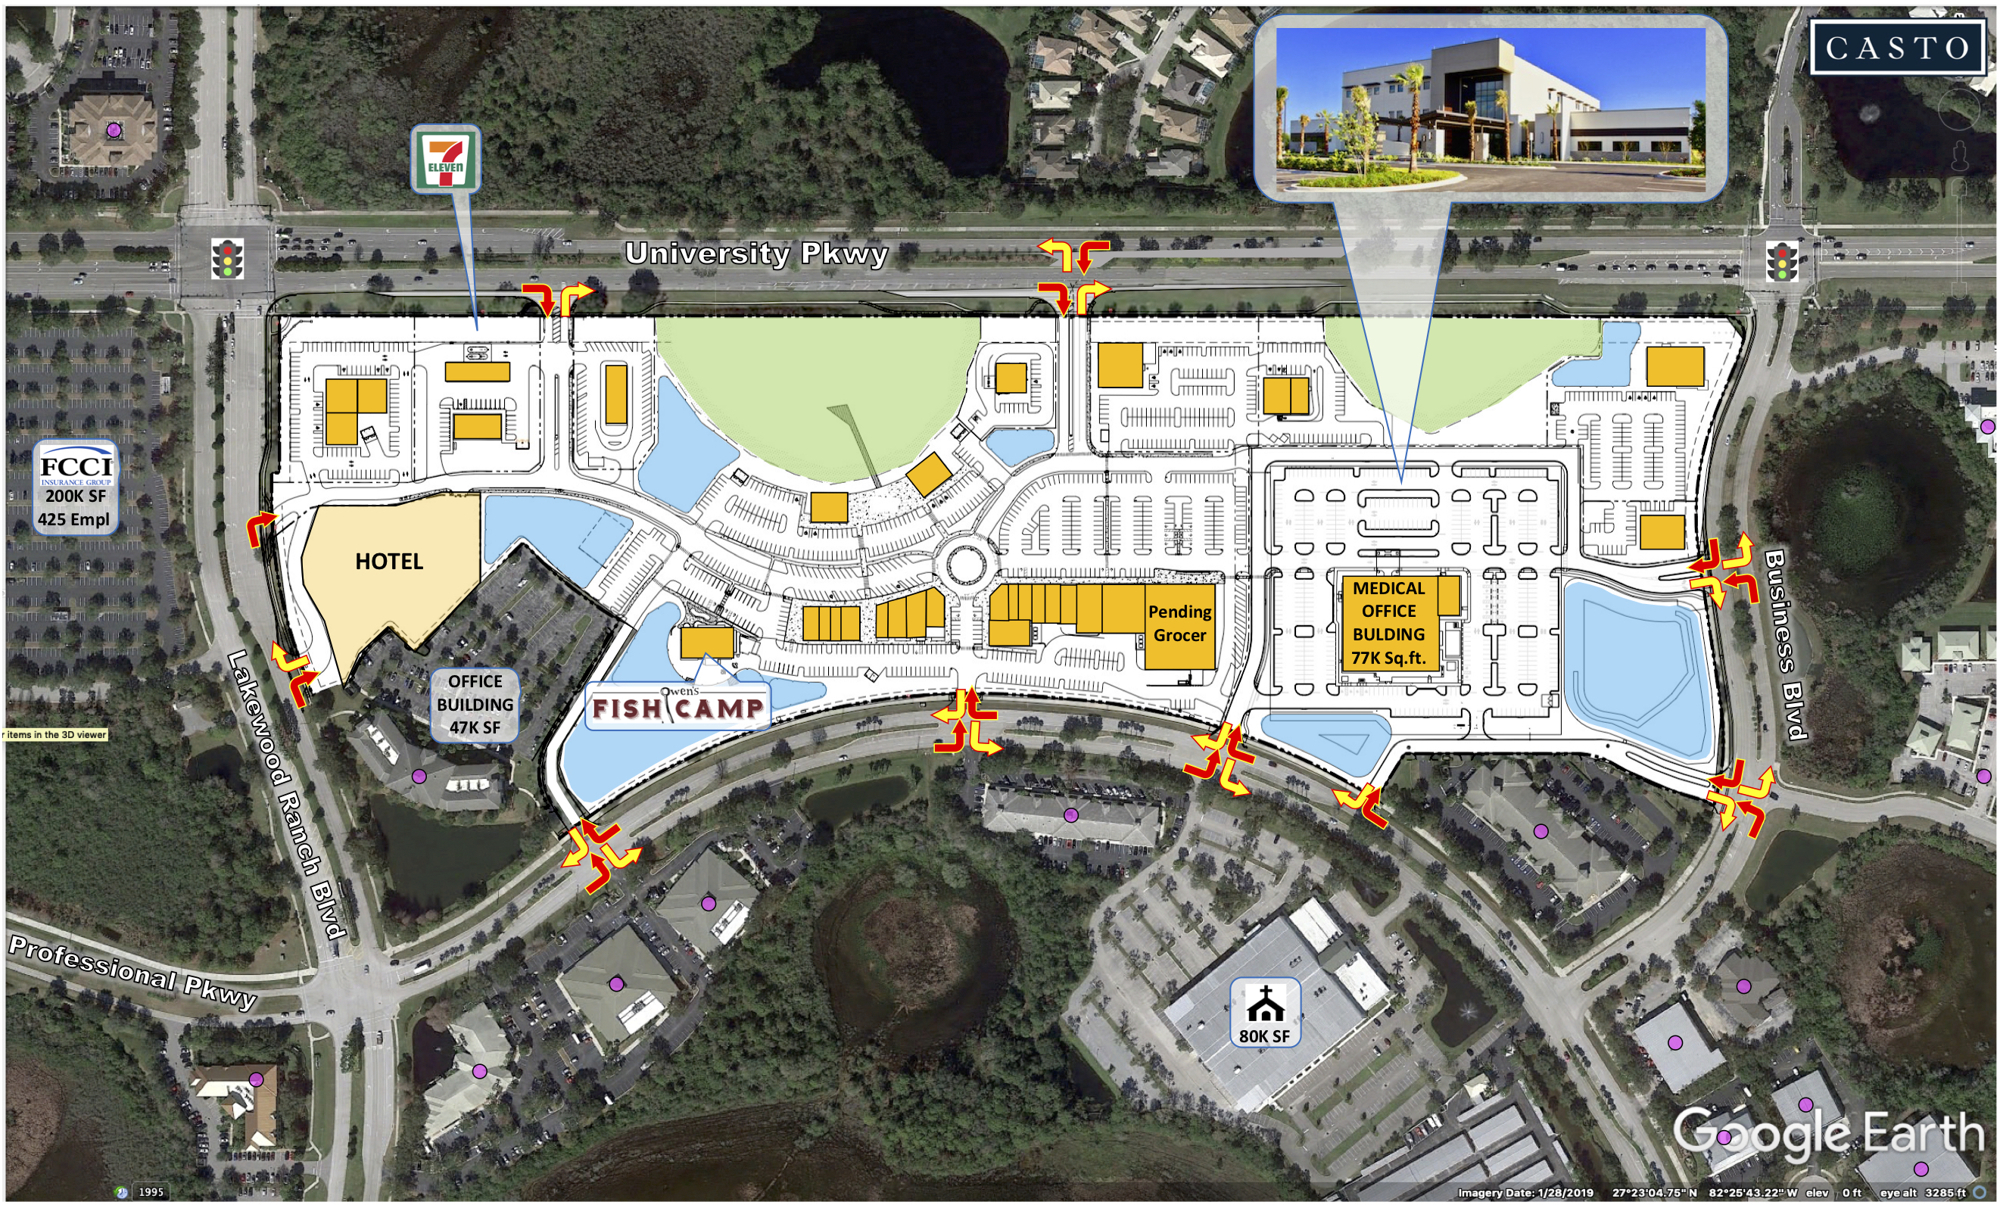 East of the Lakewood Ranch Boulevard/University Parkway intersection, Center Point already has several committed tenants, including a second location of Owen’s Fish Camp.